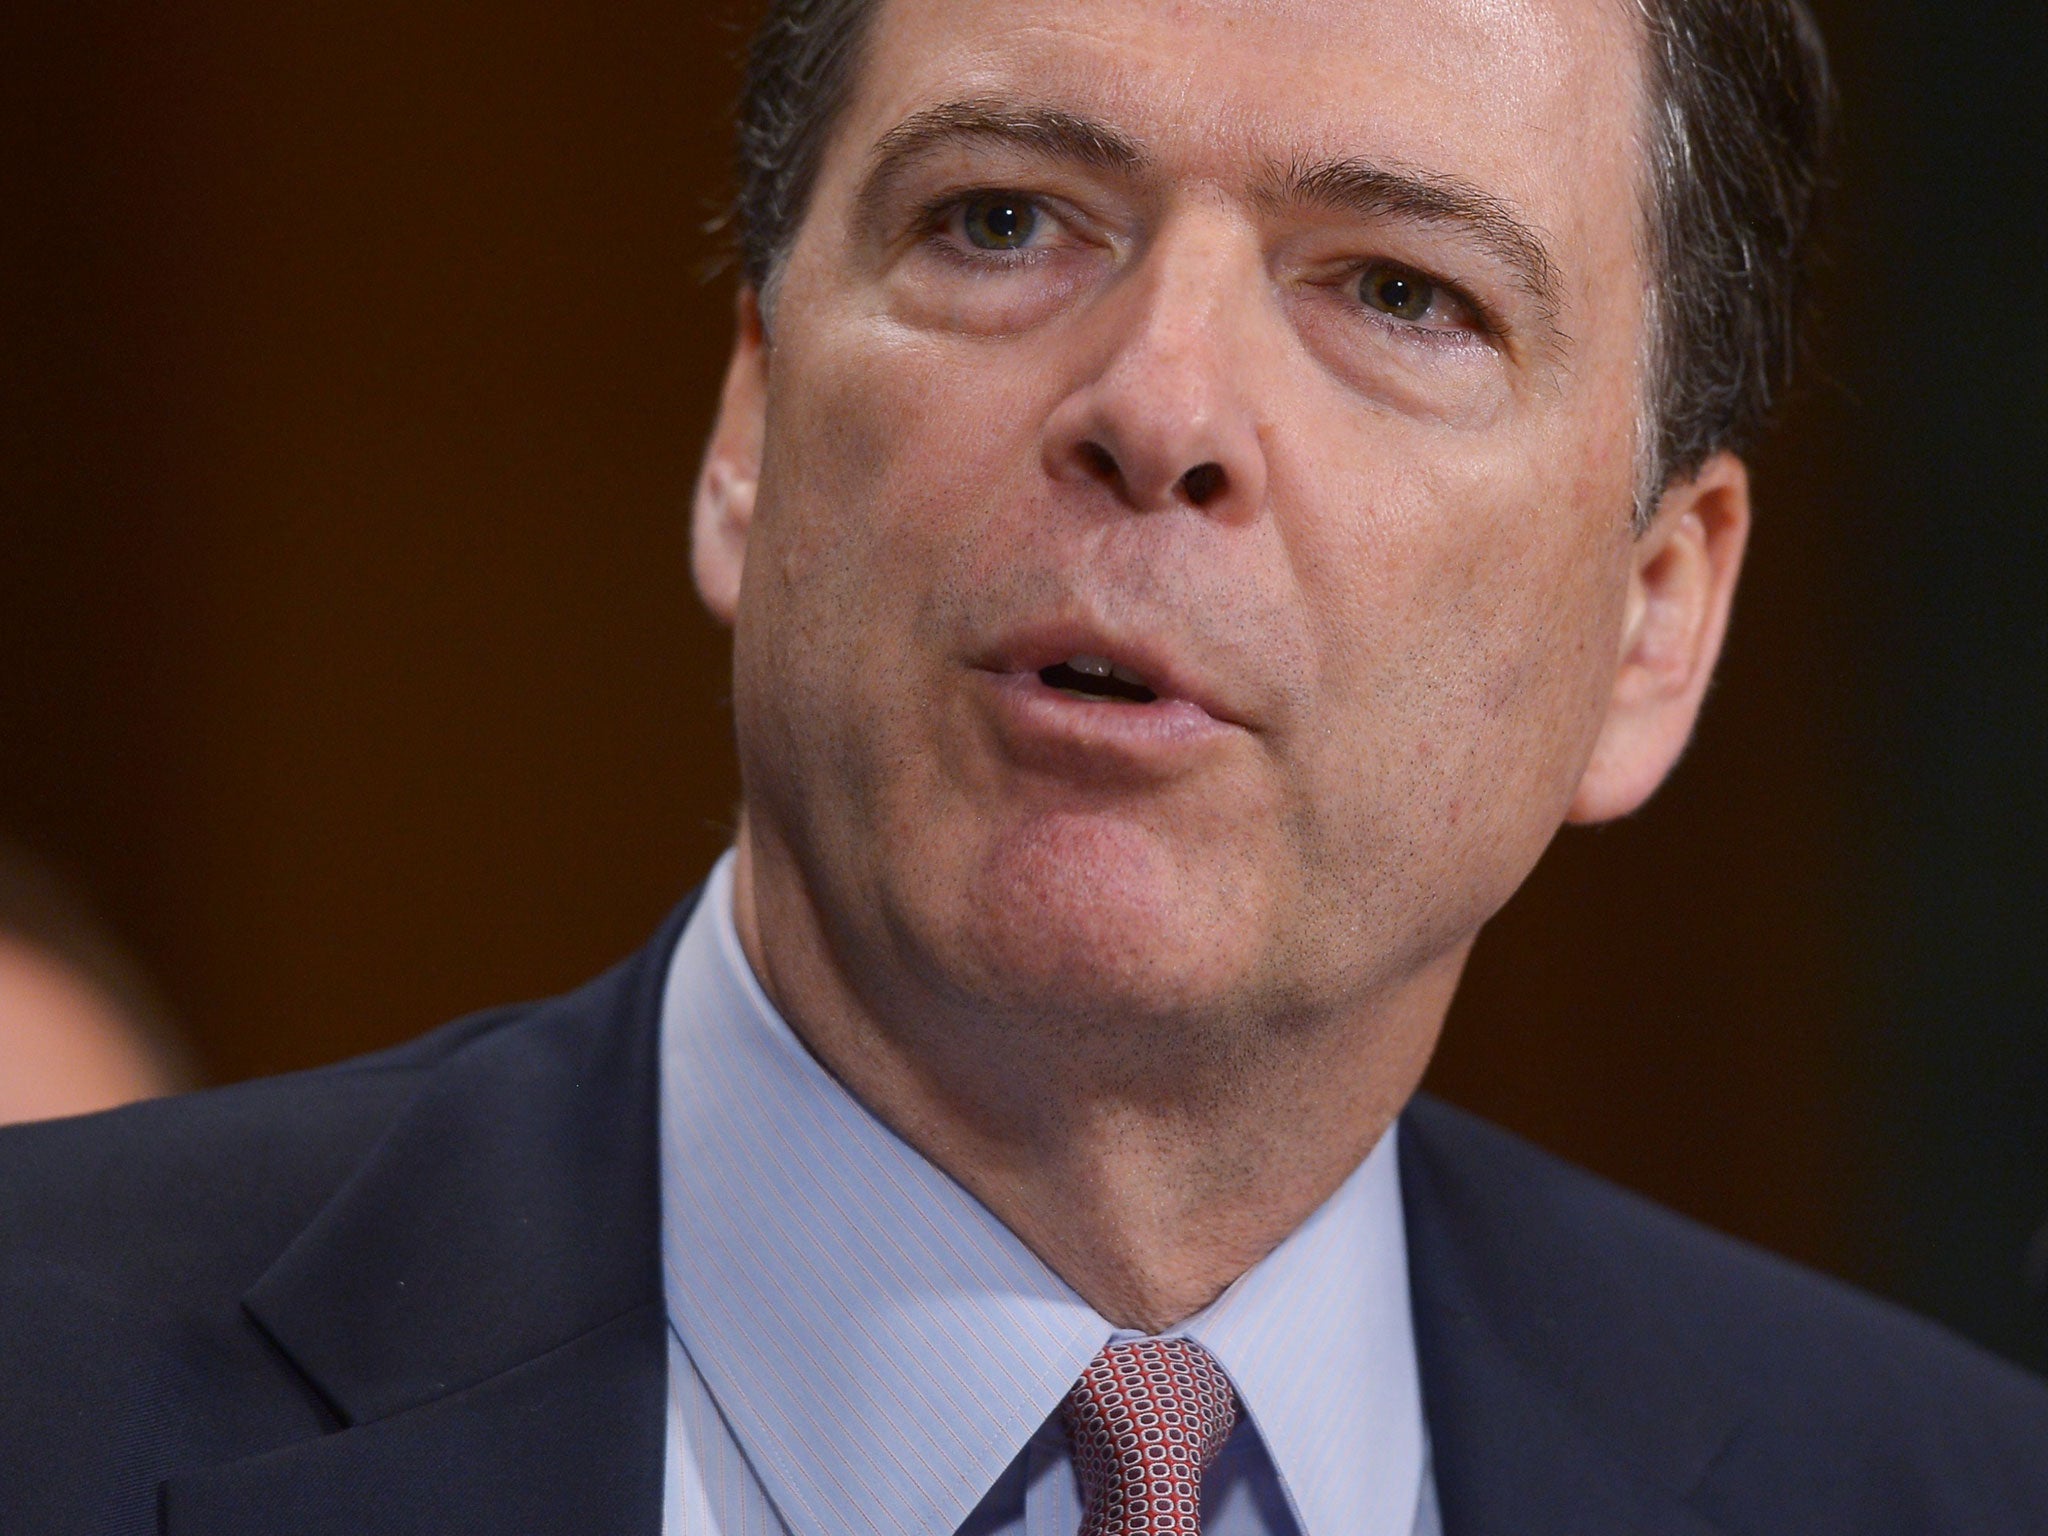 Federal Bureau of Investigation Director James Comey testifies during a hearing of the Senate Judiciary Committee in the Dirksne Senate Office Building on Capitol Hill May 21, 2014 in Washington, DC